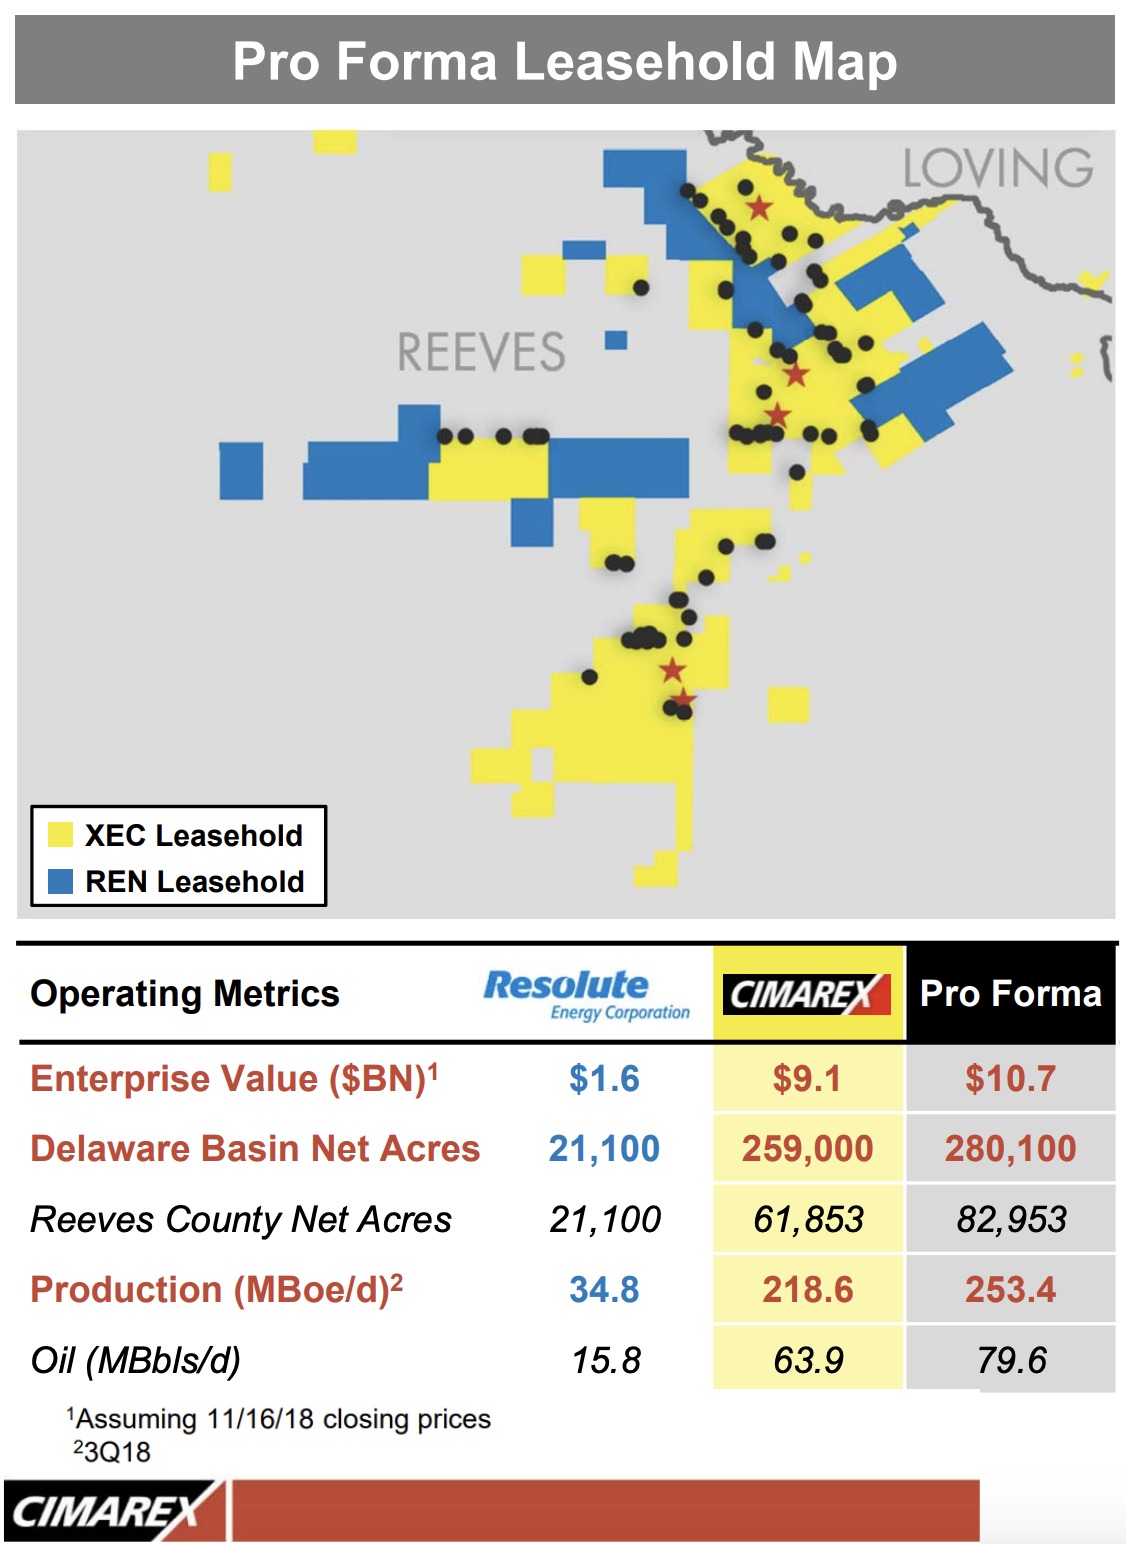 Cimarex, Resolute Energy Acquisition Pro Forma Leasehold Map (Source: Cimarex Energy Co.)